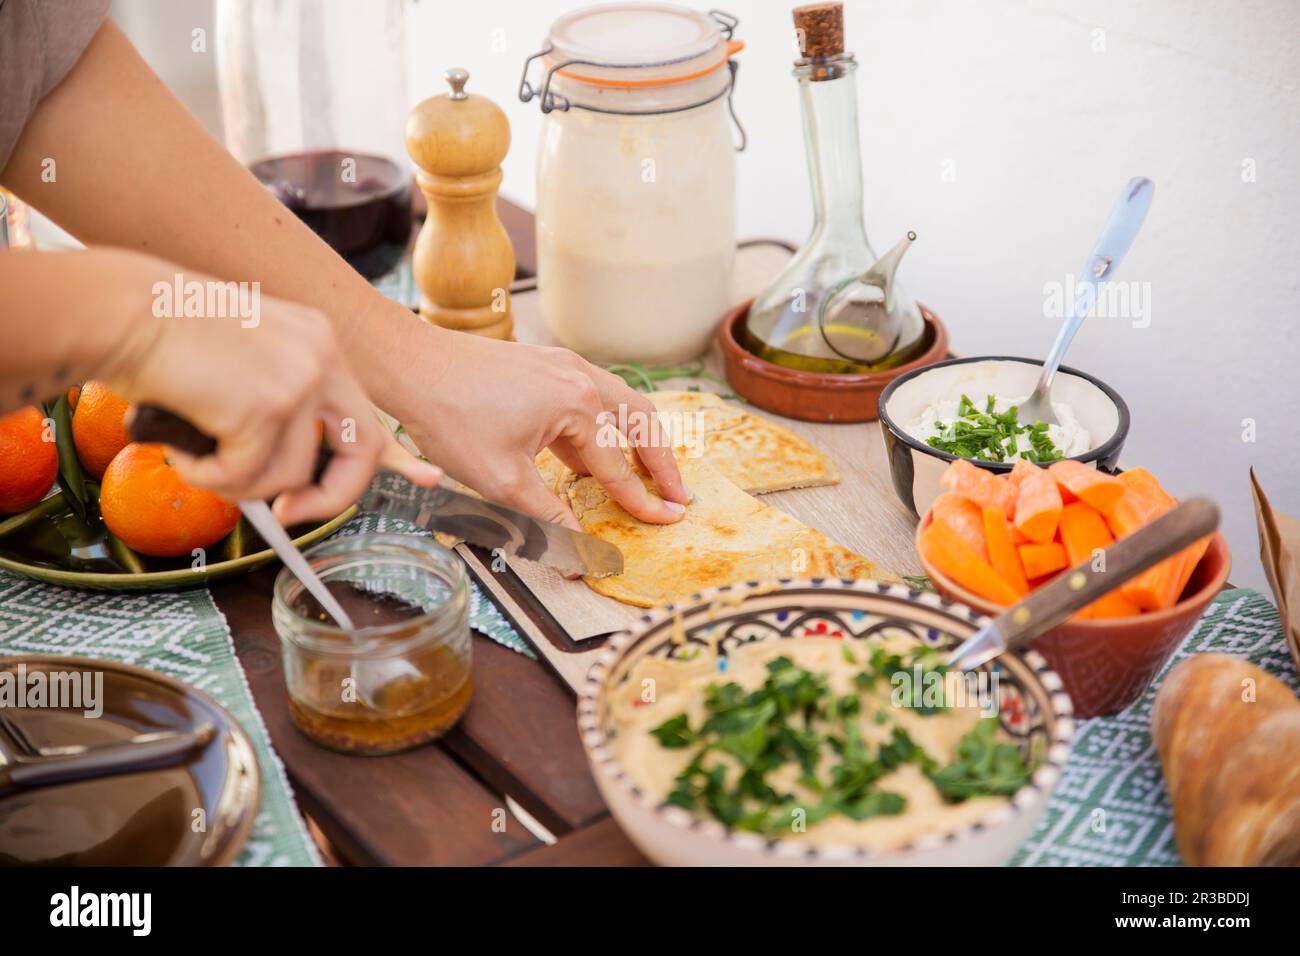 Hands cutting fermented bread surrounded with healthy meal in bowls and vegan products Stock Photo